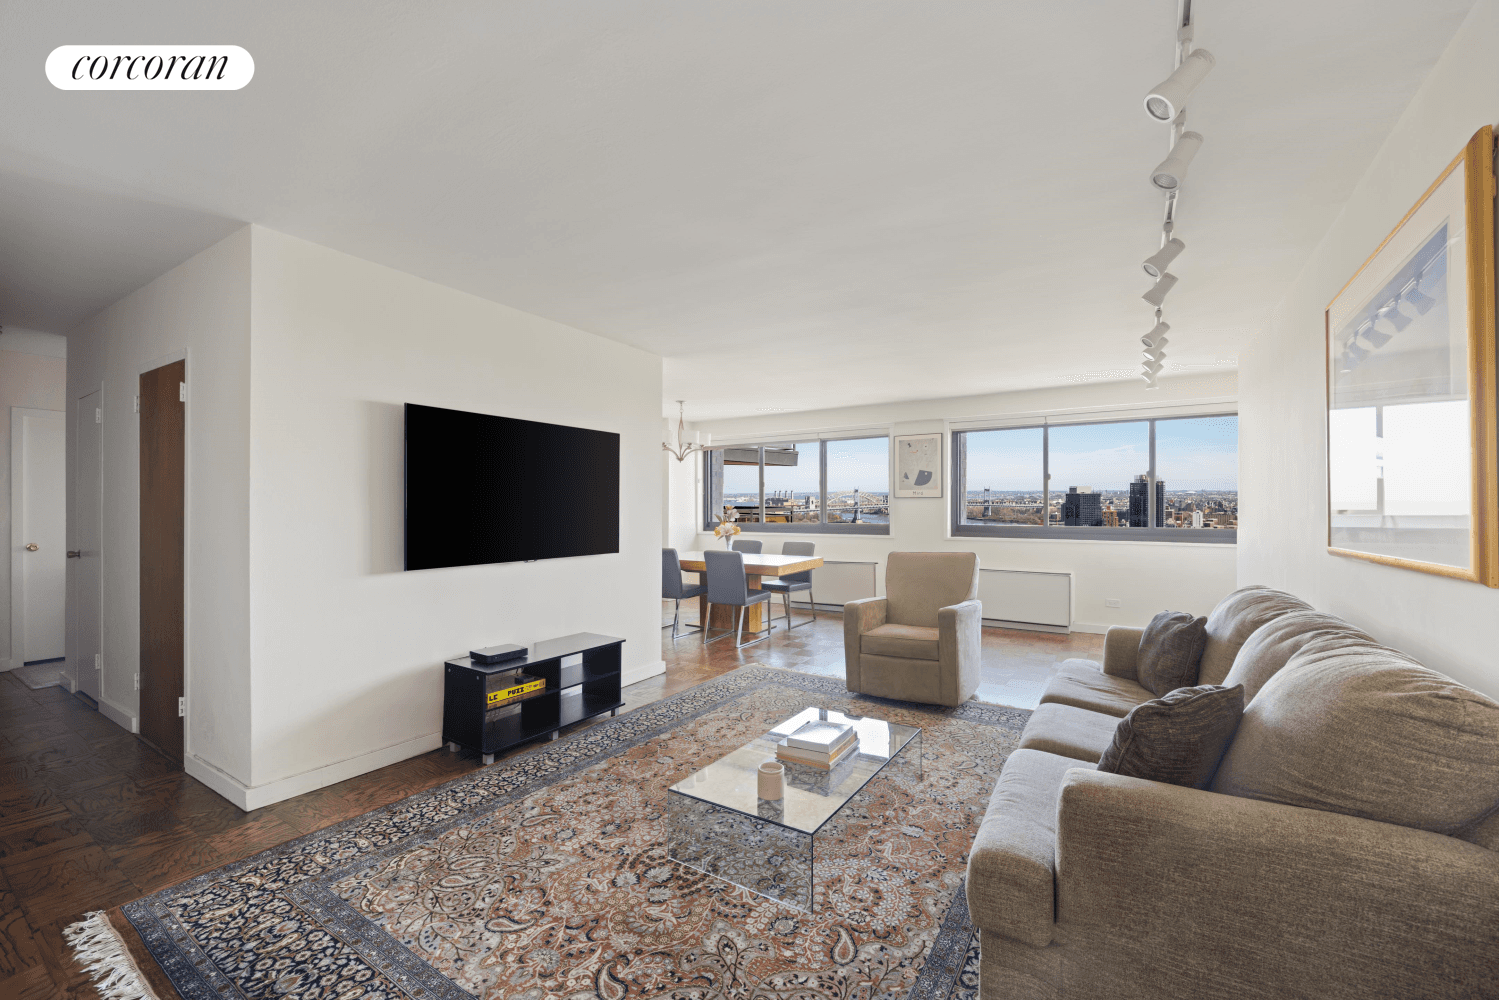 Enjoy sweeping panoramic city, bridge and East River views from this spacious, high floor 2 bedroom, 2 bathroom full service cooperative at 1725 York Avenue.